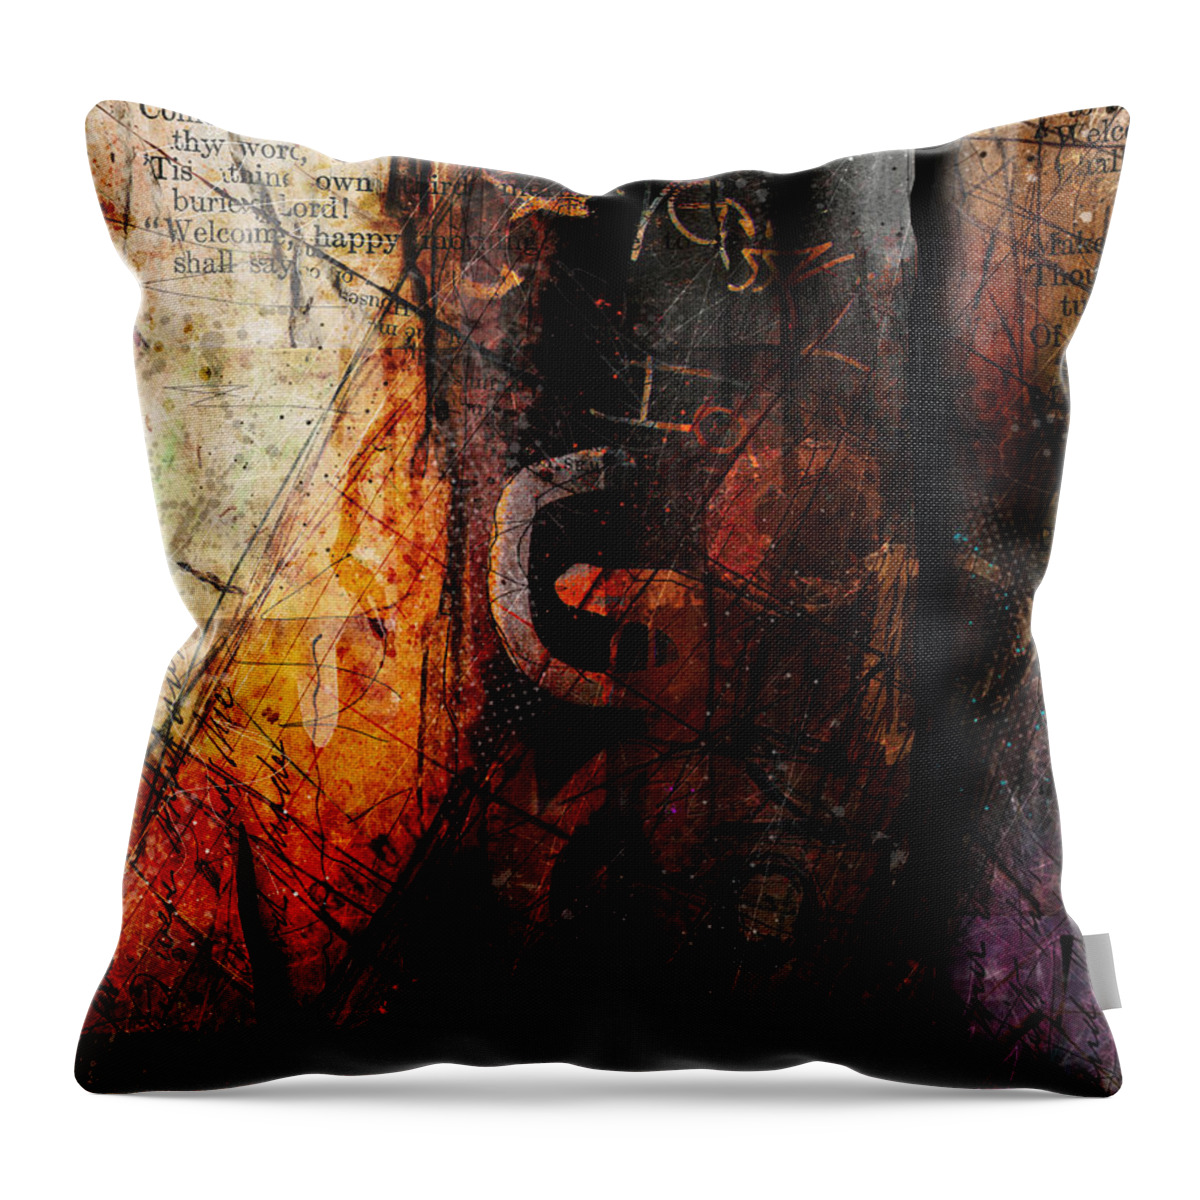 Abstract Throw Pillow featuring the digital art Wounded by Gary Bodnar